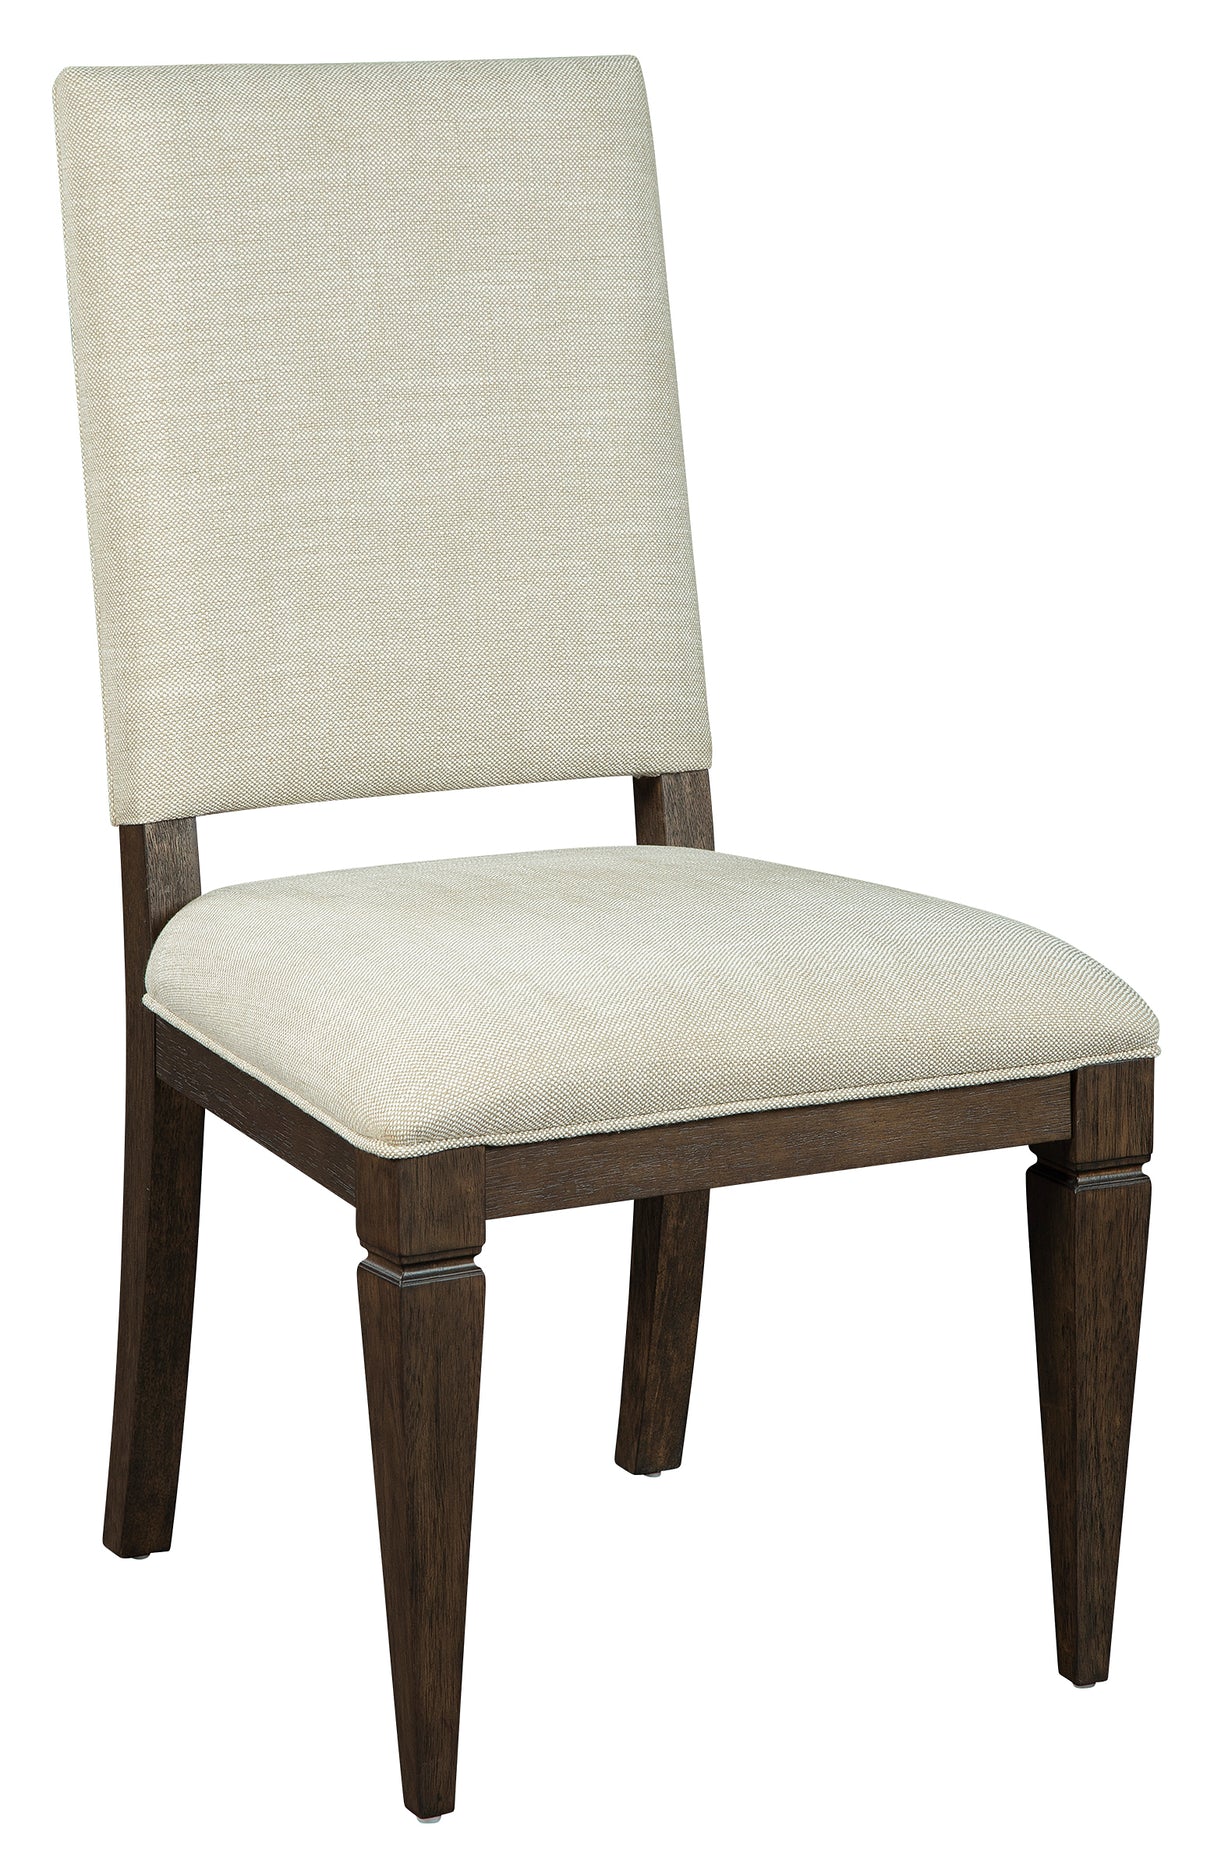 Hekman 25623 Linwood 20.5in. x 22.5in. x 40in. Dining Side Chair